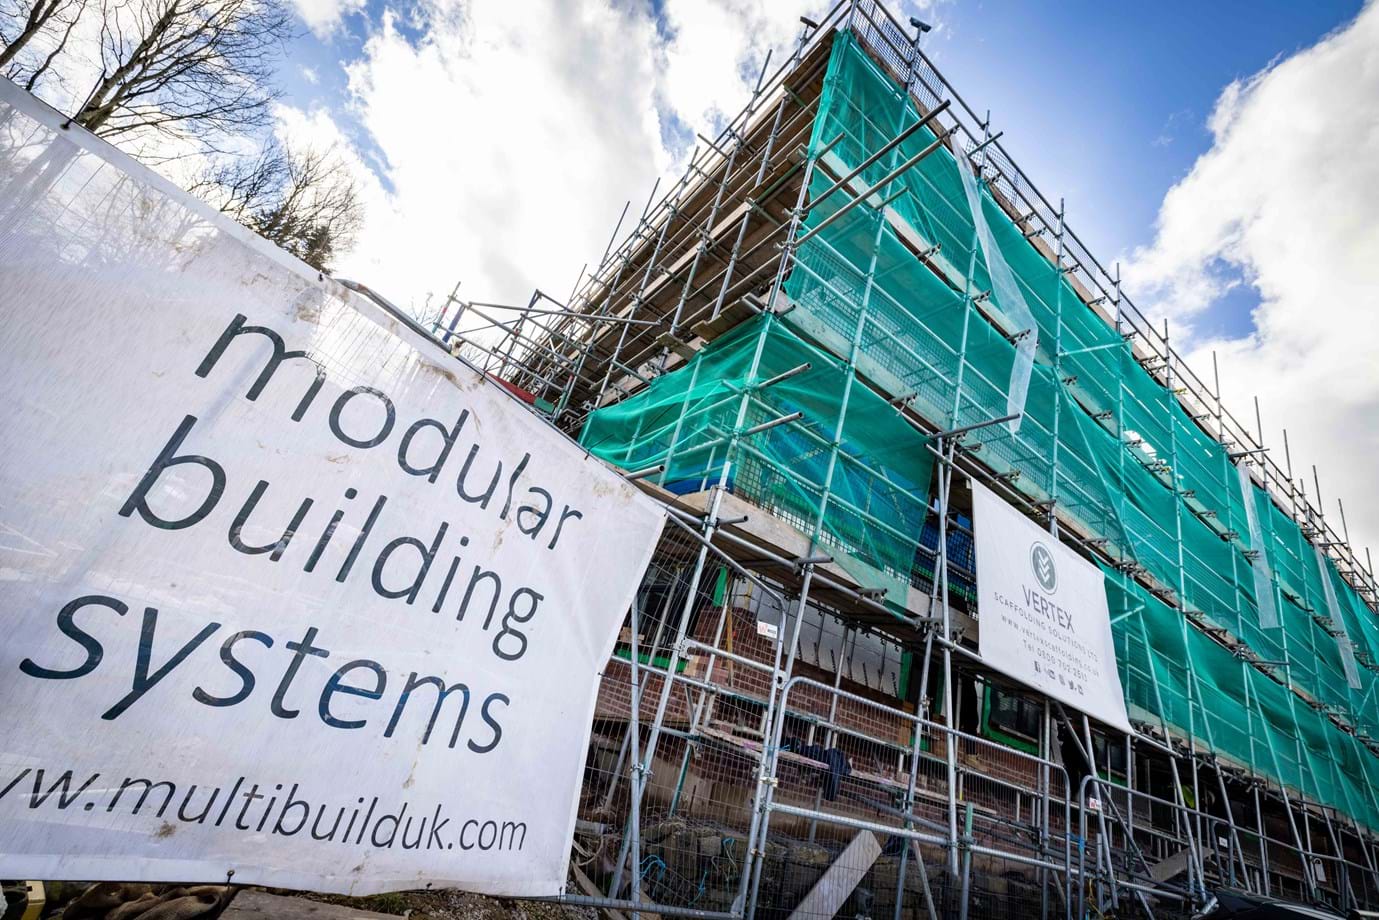 We are working with modular specialists Multi Build UK Ltd to deliver the Stephenson St project